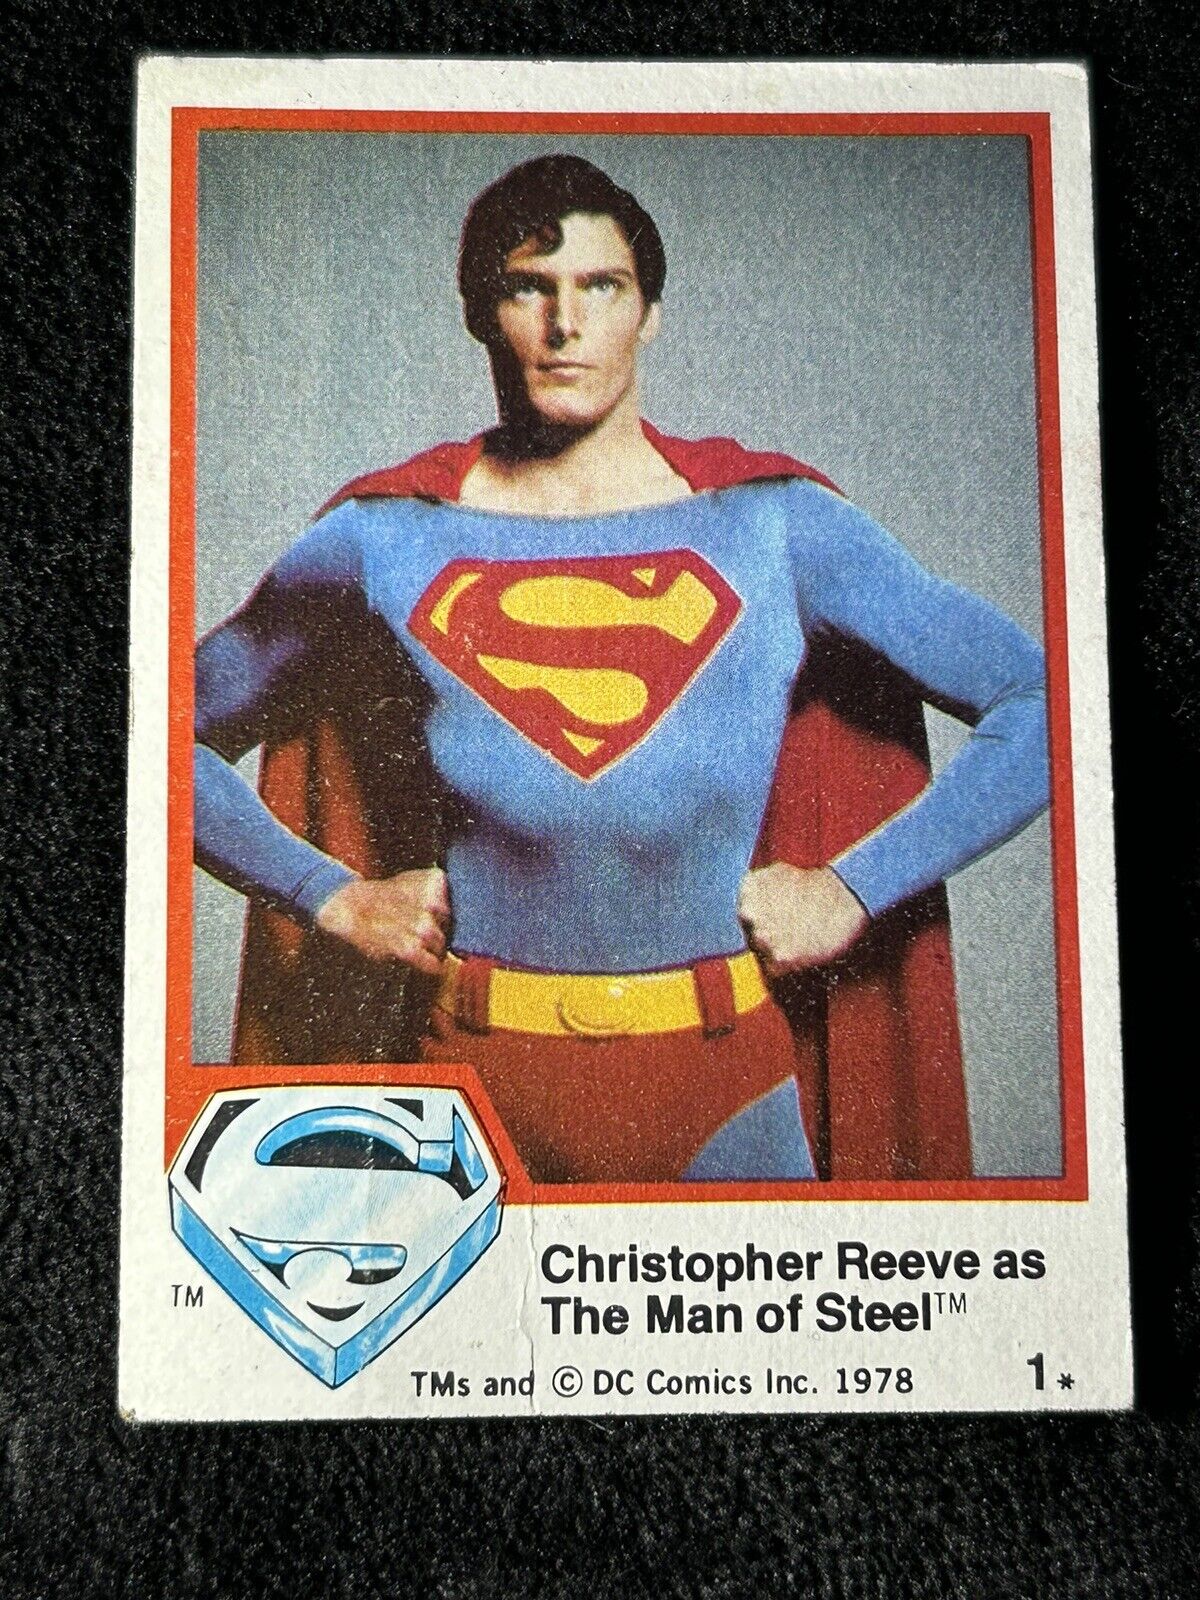 1978 Topps Superman Christopher Reeve as The Man of Steel Card # 1 - Wrinkle C51